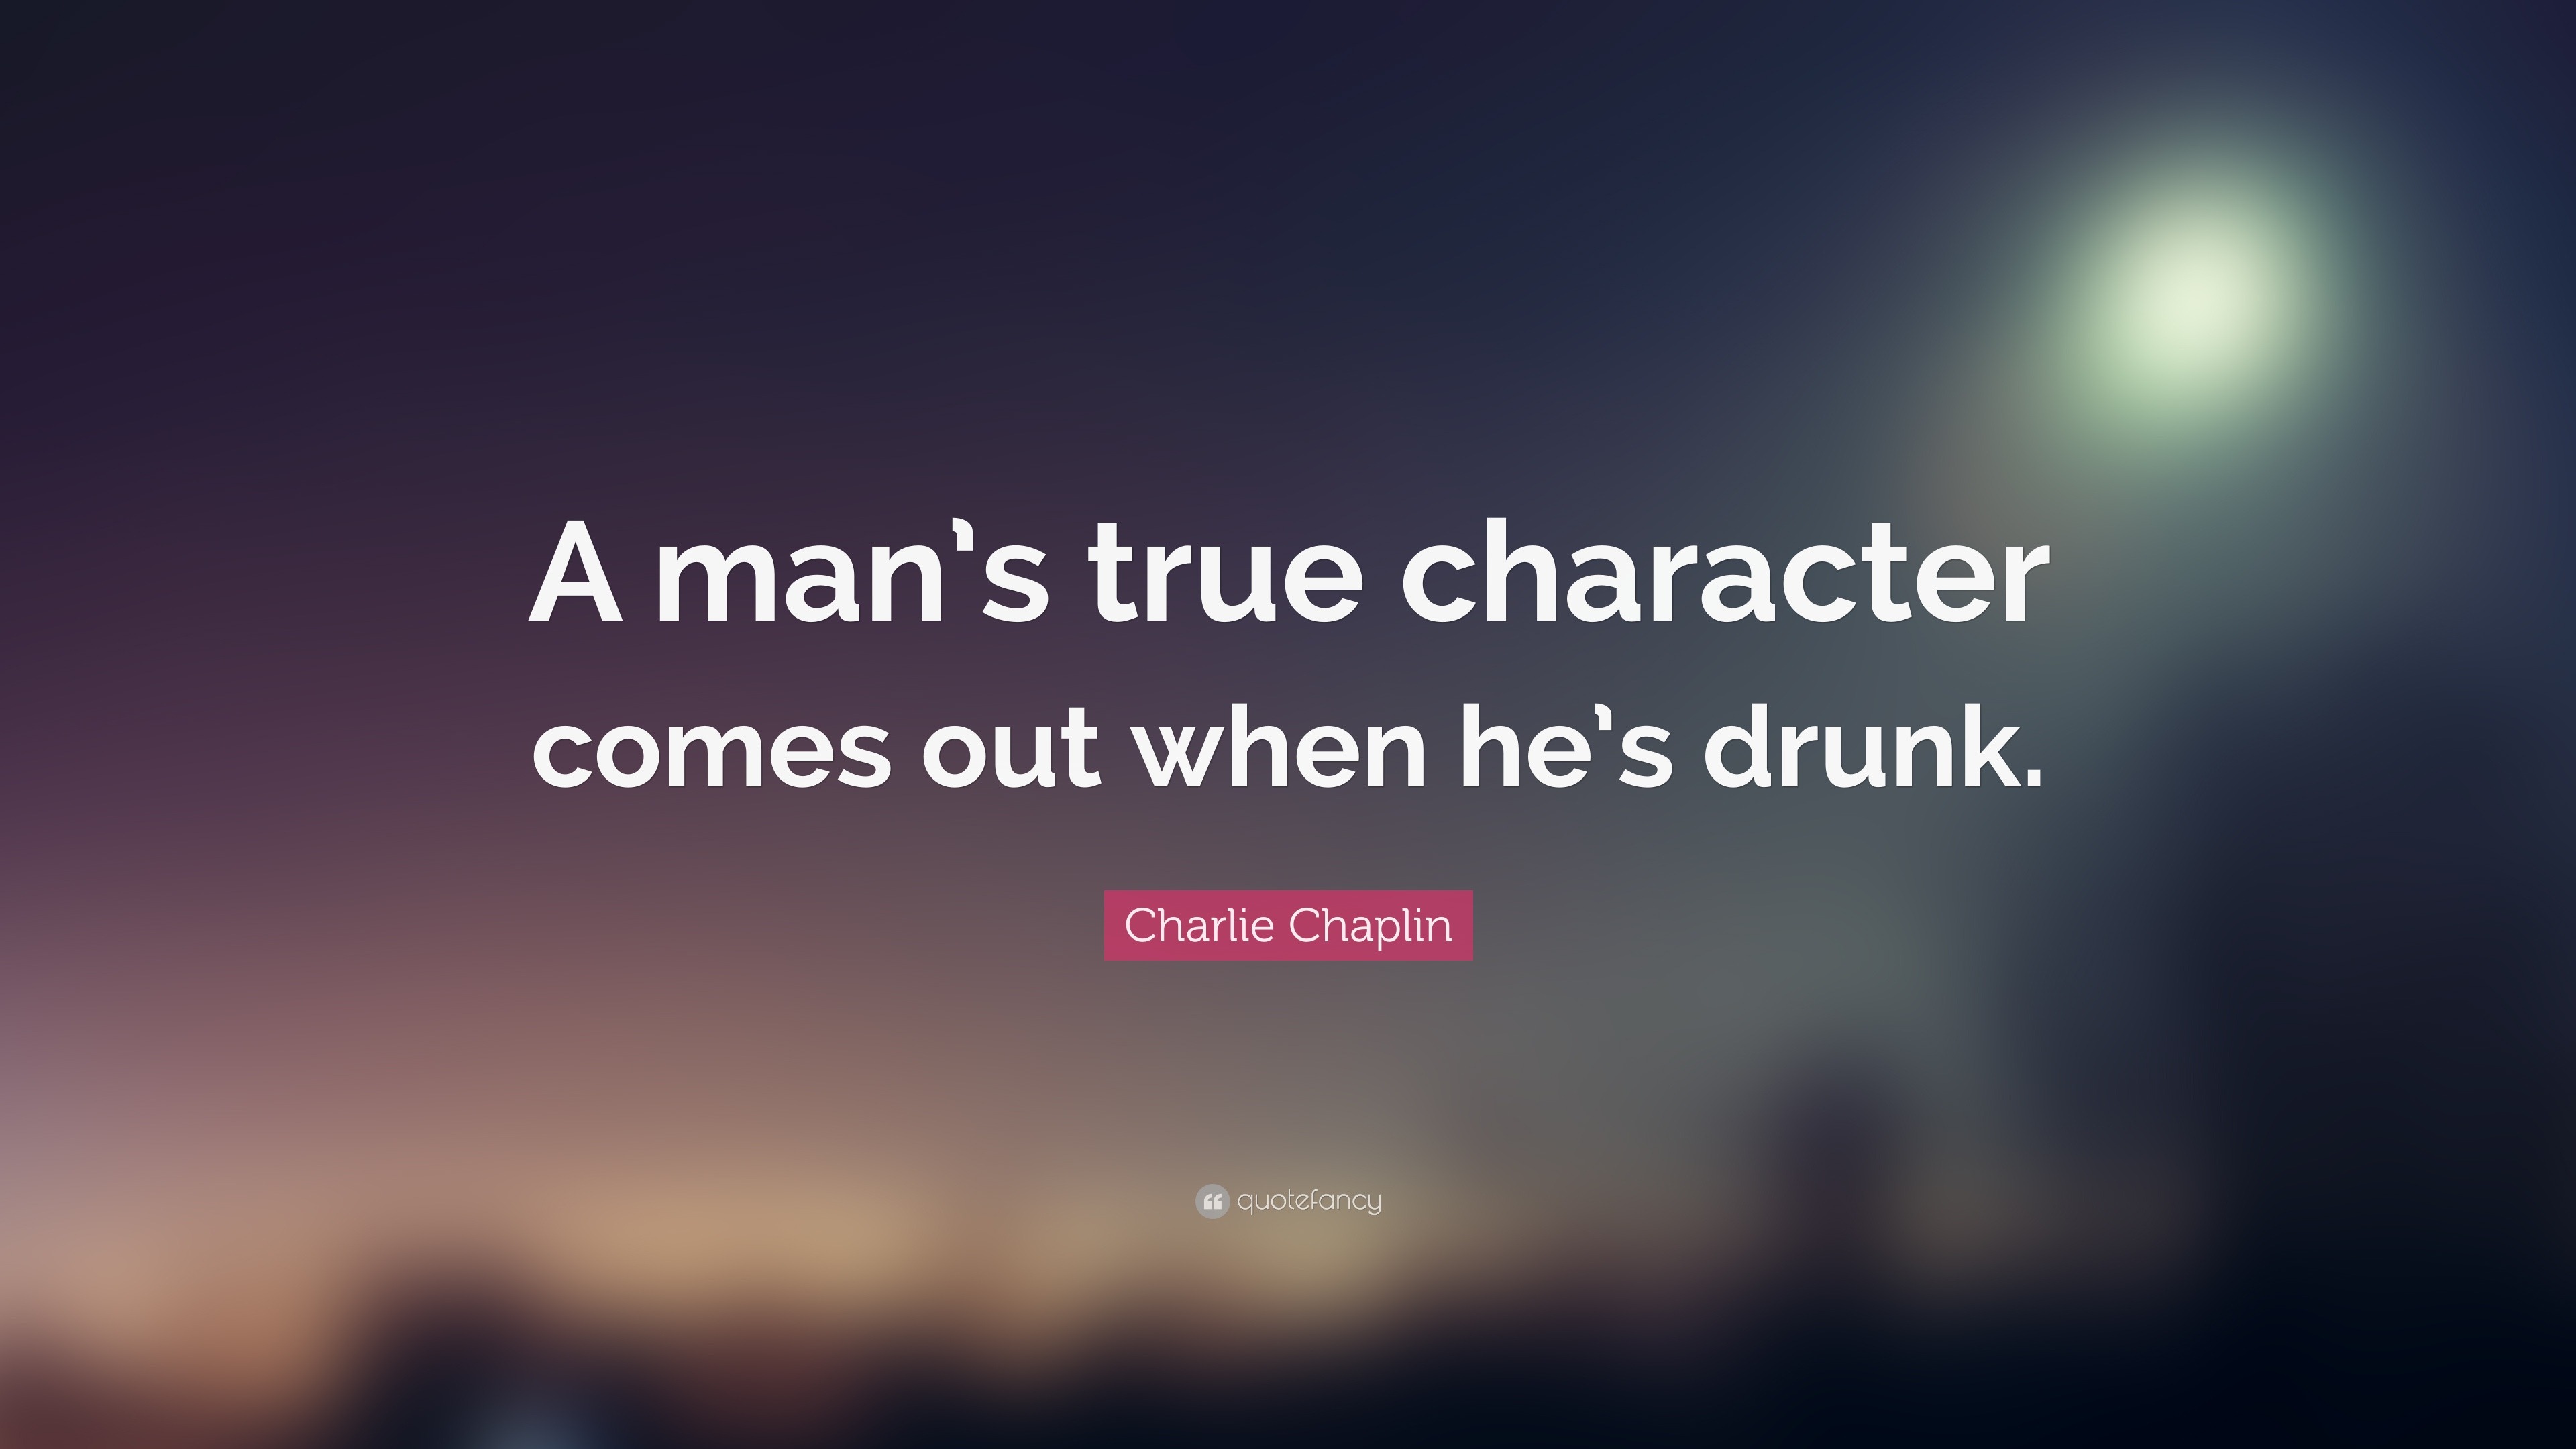 Character Quotes (40 wallpapers) - Quotefancy